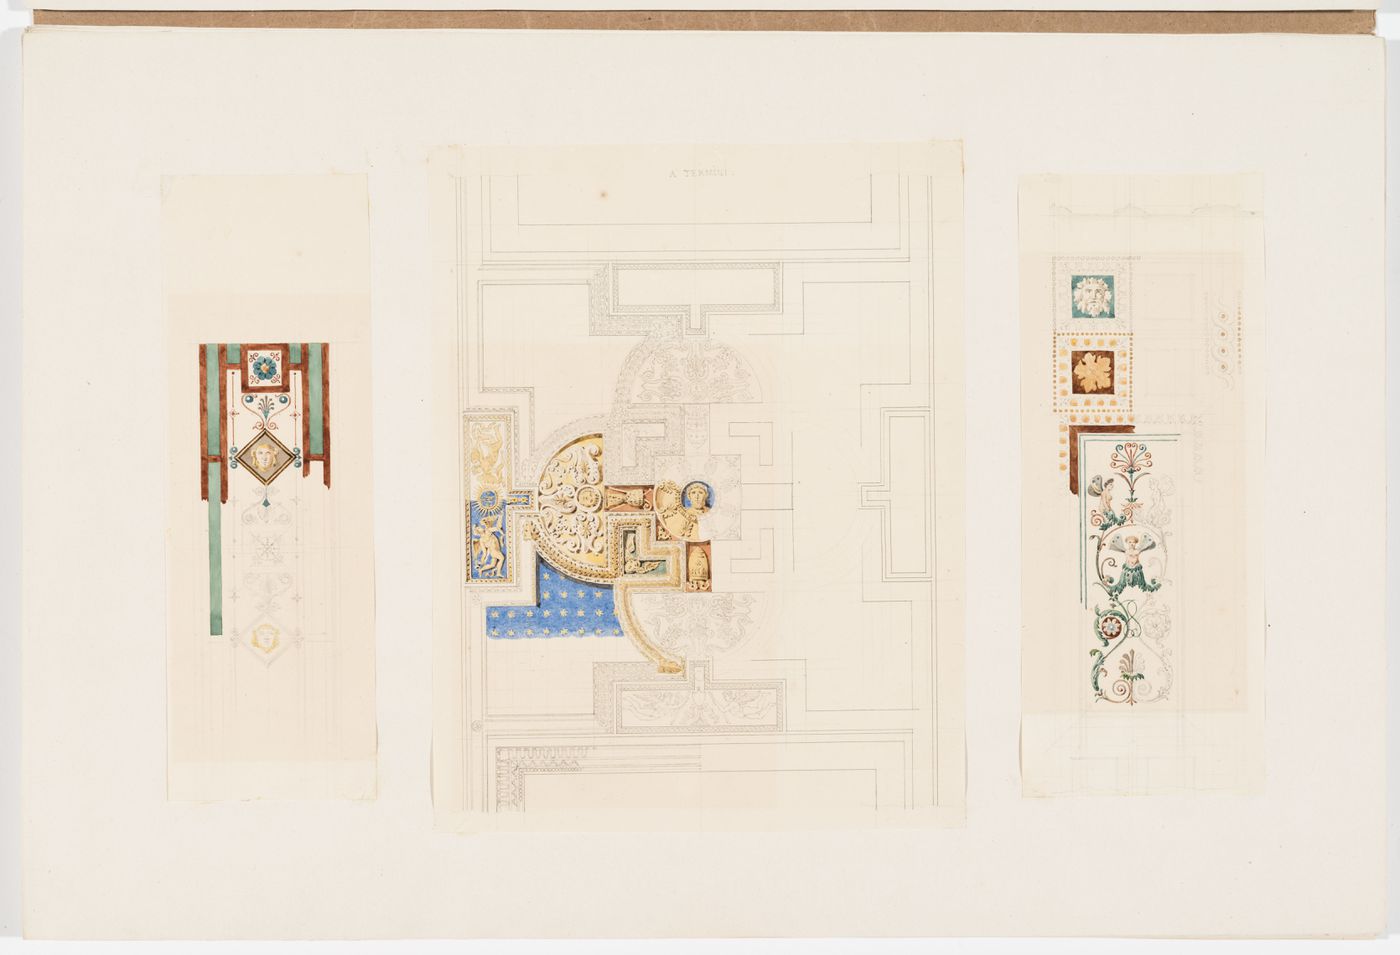 Ornament drawings of a band decorated with arabesques and mascarons; Interlocking panels with ornamentation surrounded by decorated moldings in 'Termini'; Panel decorated with grotesques and surrounded by two smaller panels with egg and dart moldings